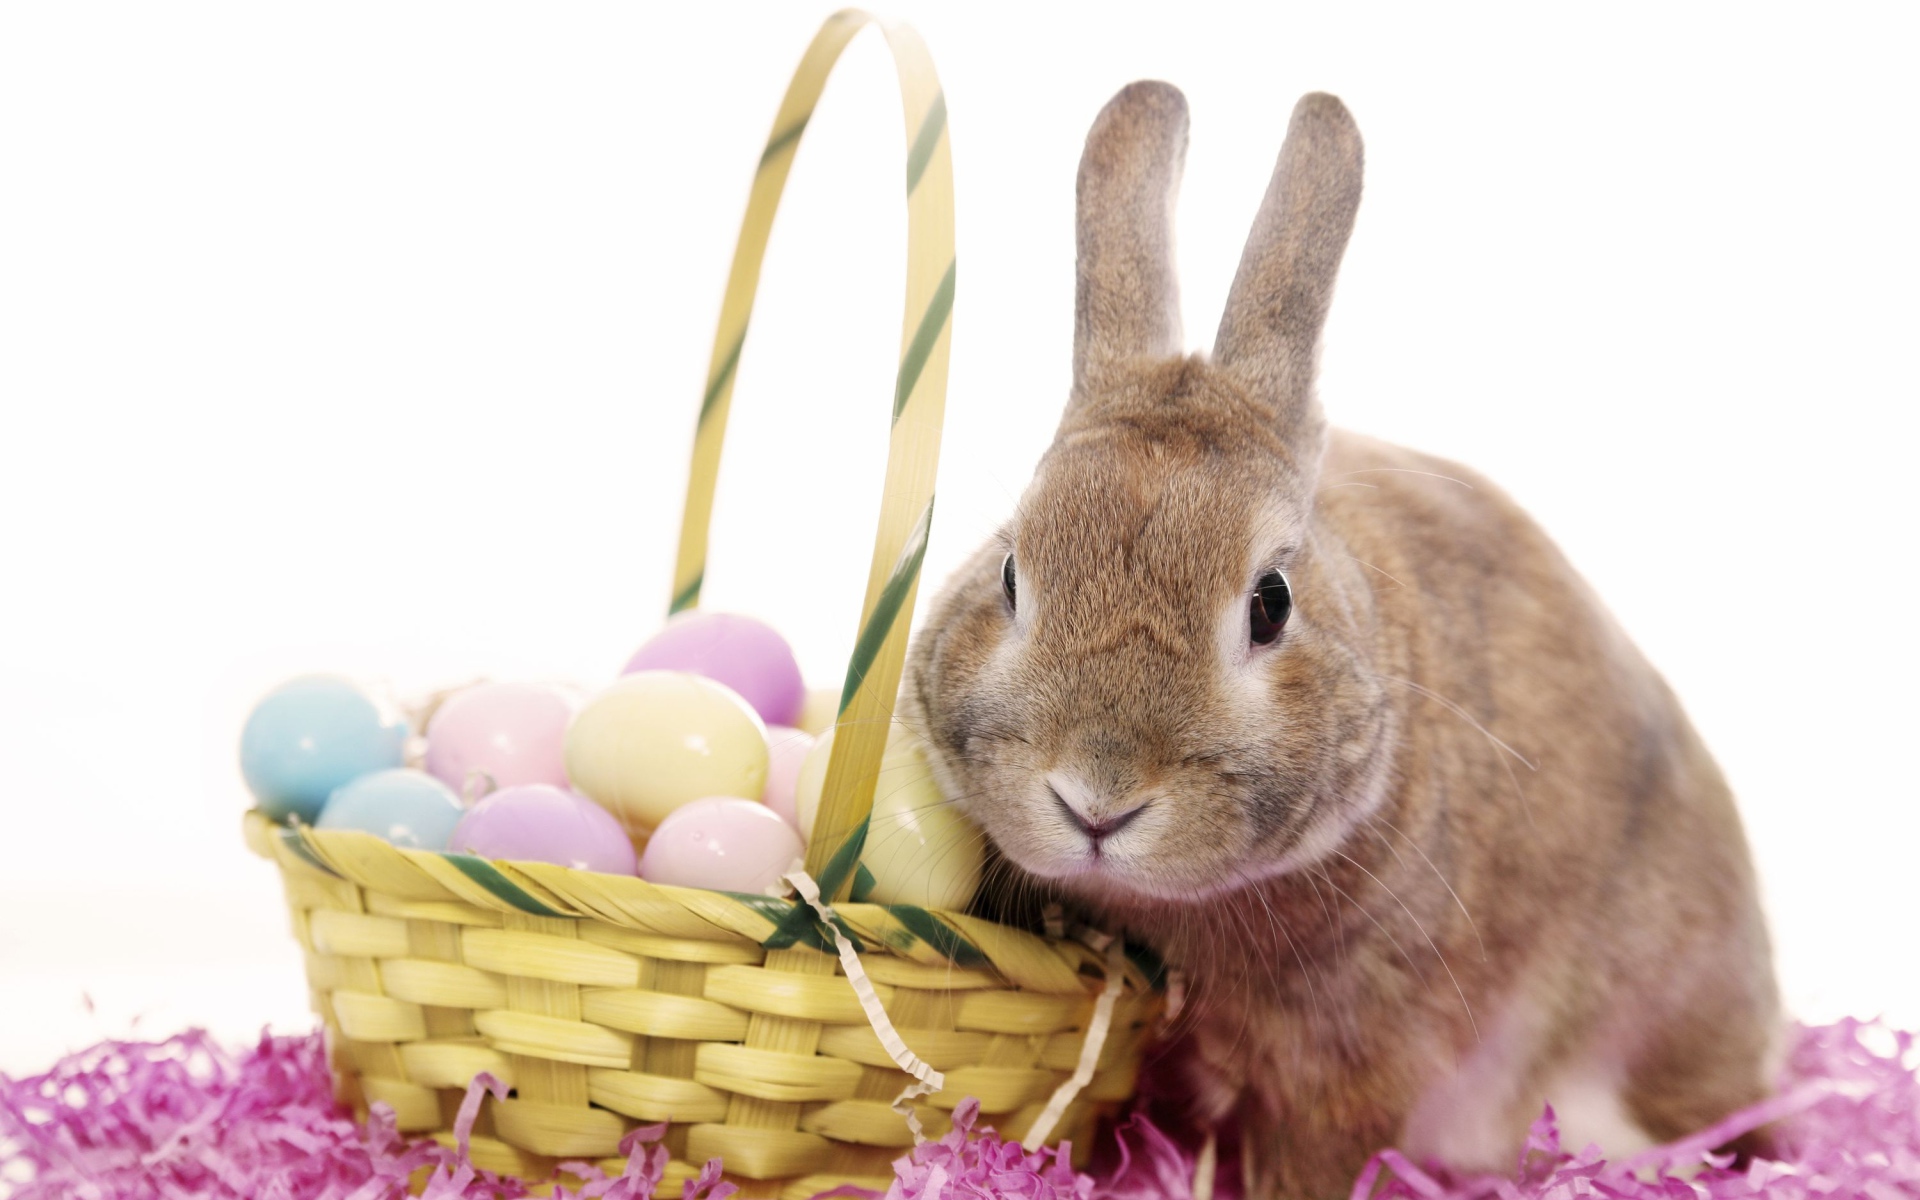 Rabbit with a basket of eggs on a white background